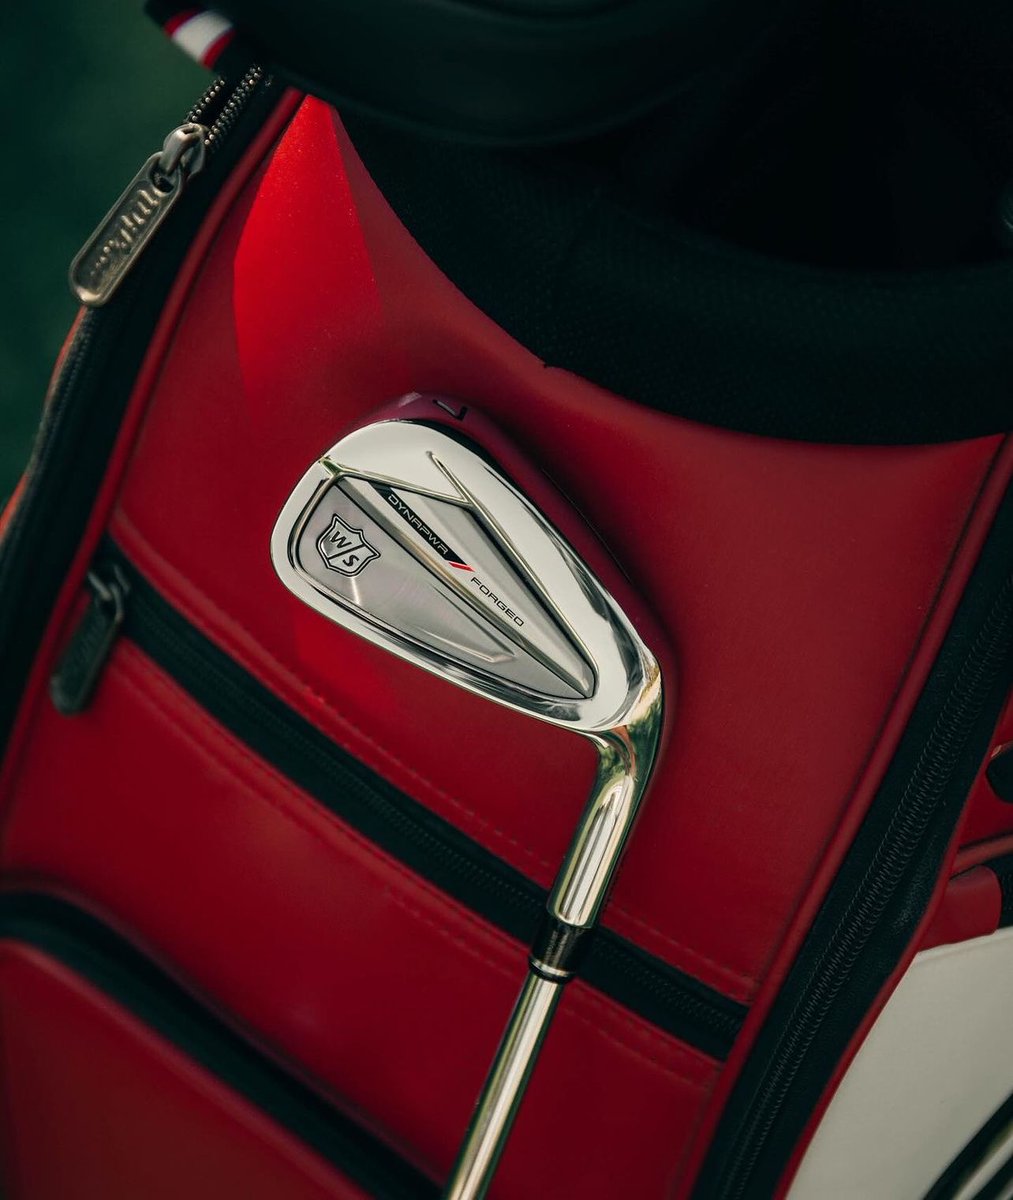 Dynapower Forged Iron A compact players distance iron featuring state of the art AI face technology and a forged 8620 carbon steel design. When power meets feel 👍 @wilsongolfeu #wilson #dynapowerforged